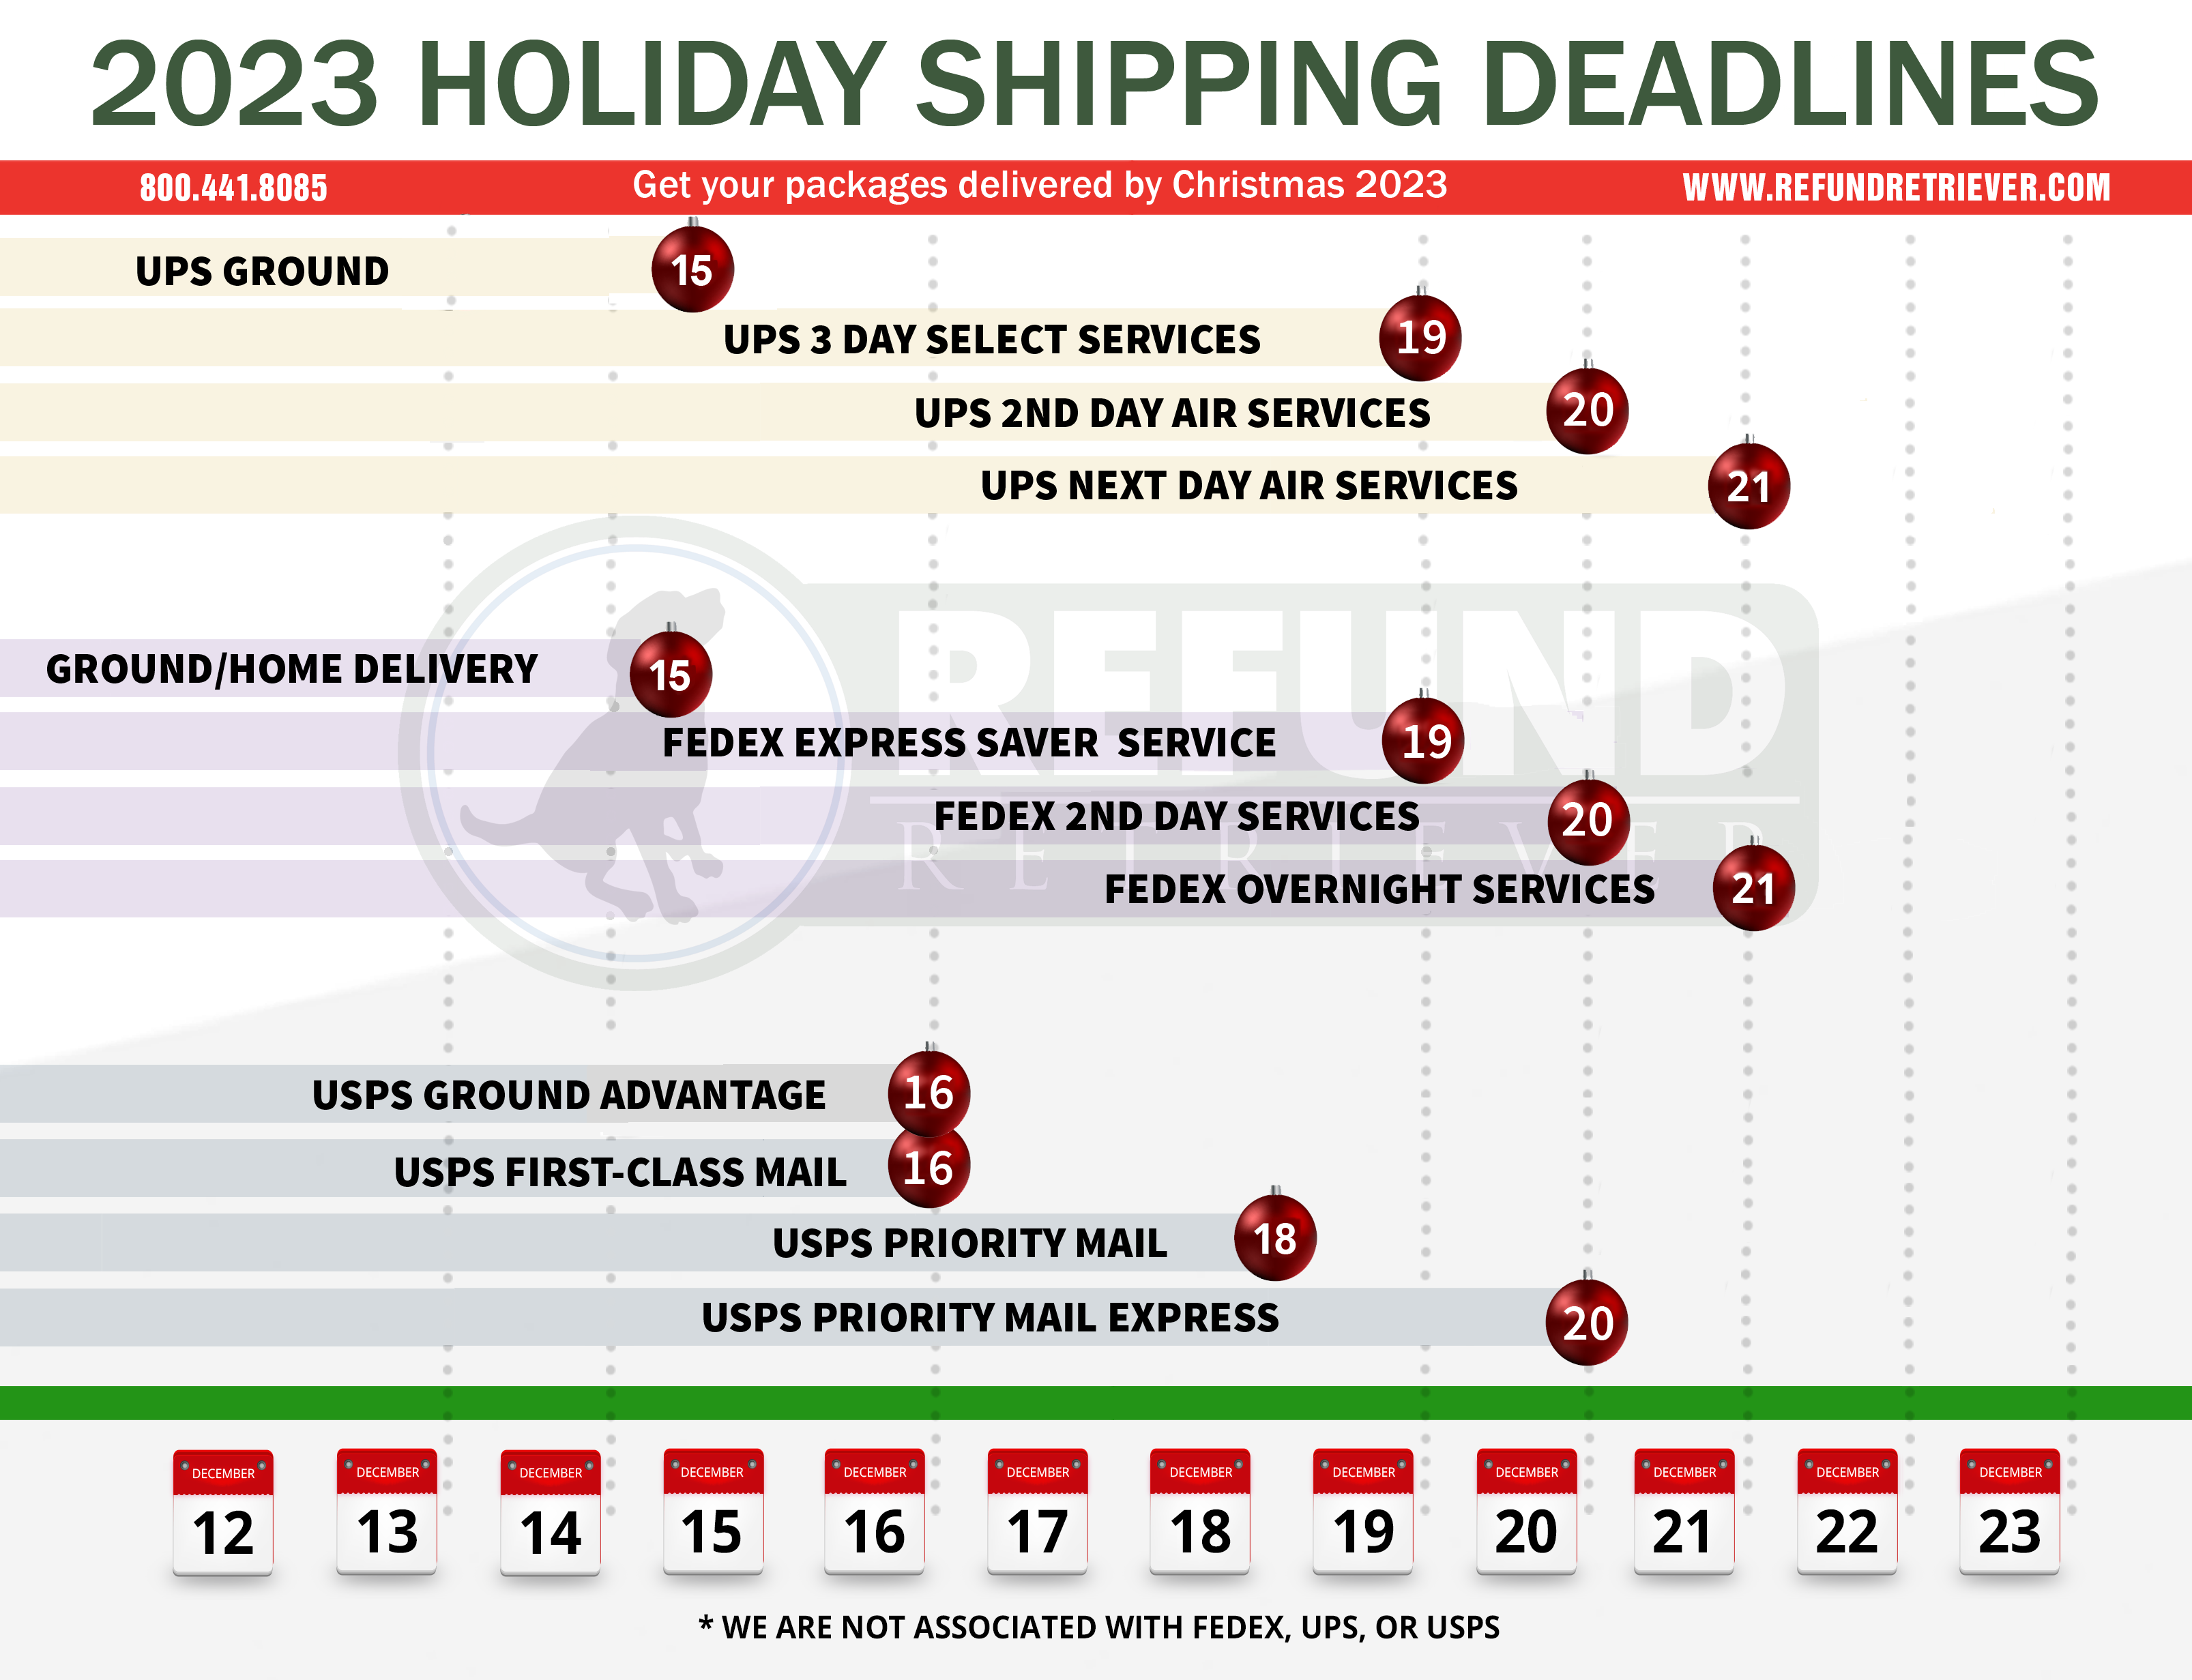 When to mail out packages to ensure they arrive by Christmas